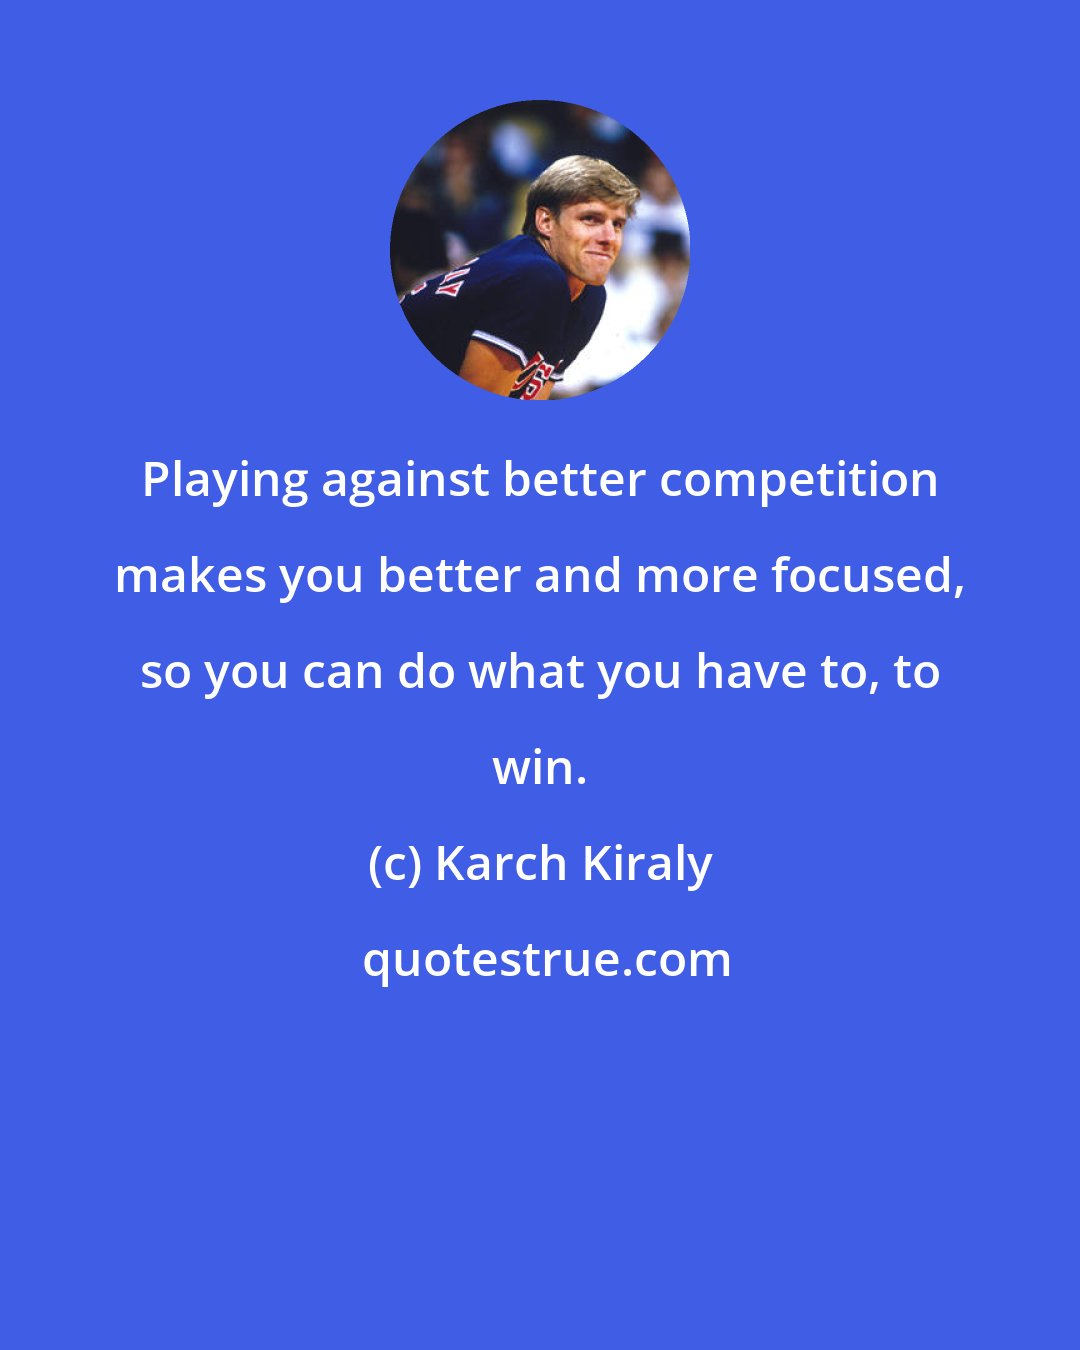 Karch Kiraly: Playing against better competition makes you better and more focused, so you can do what you have to, to win.